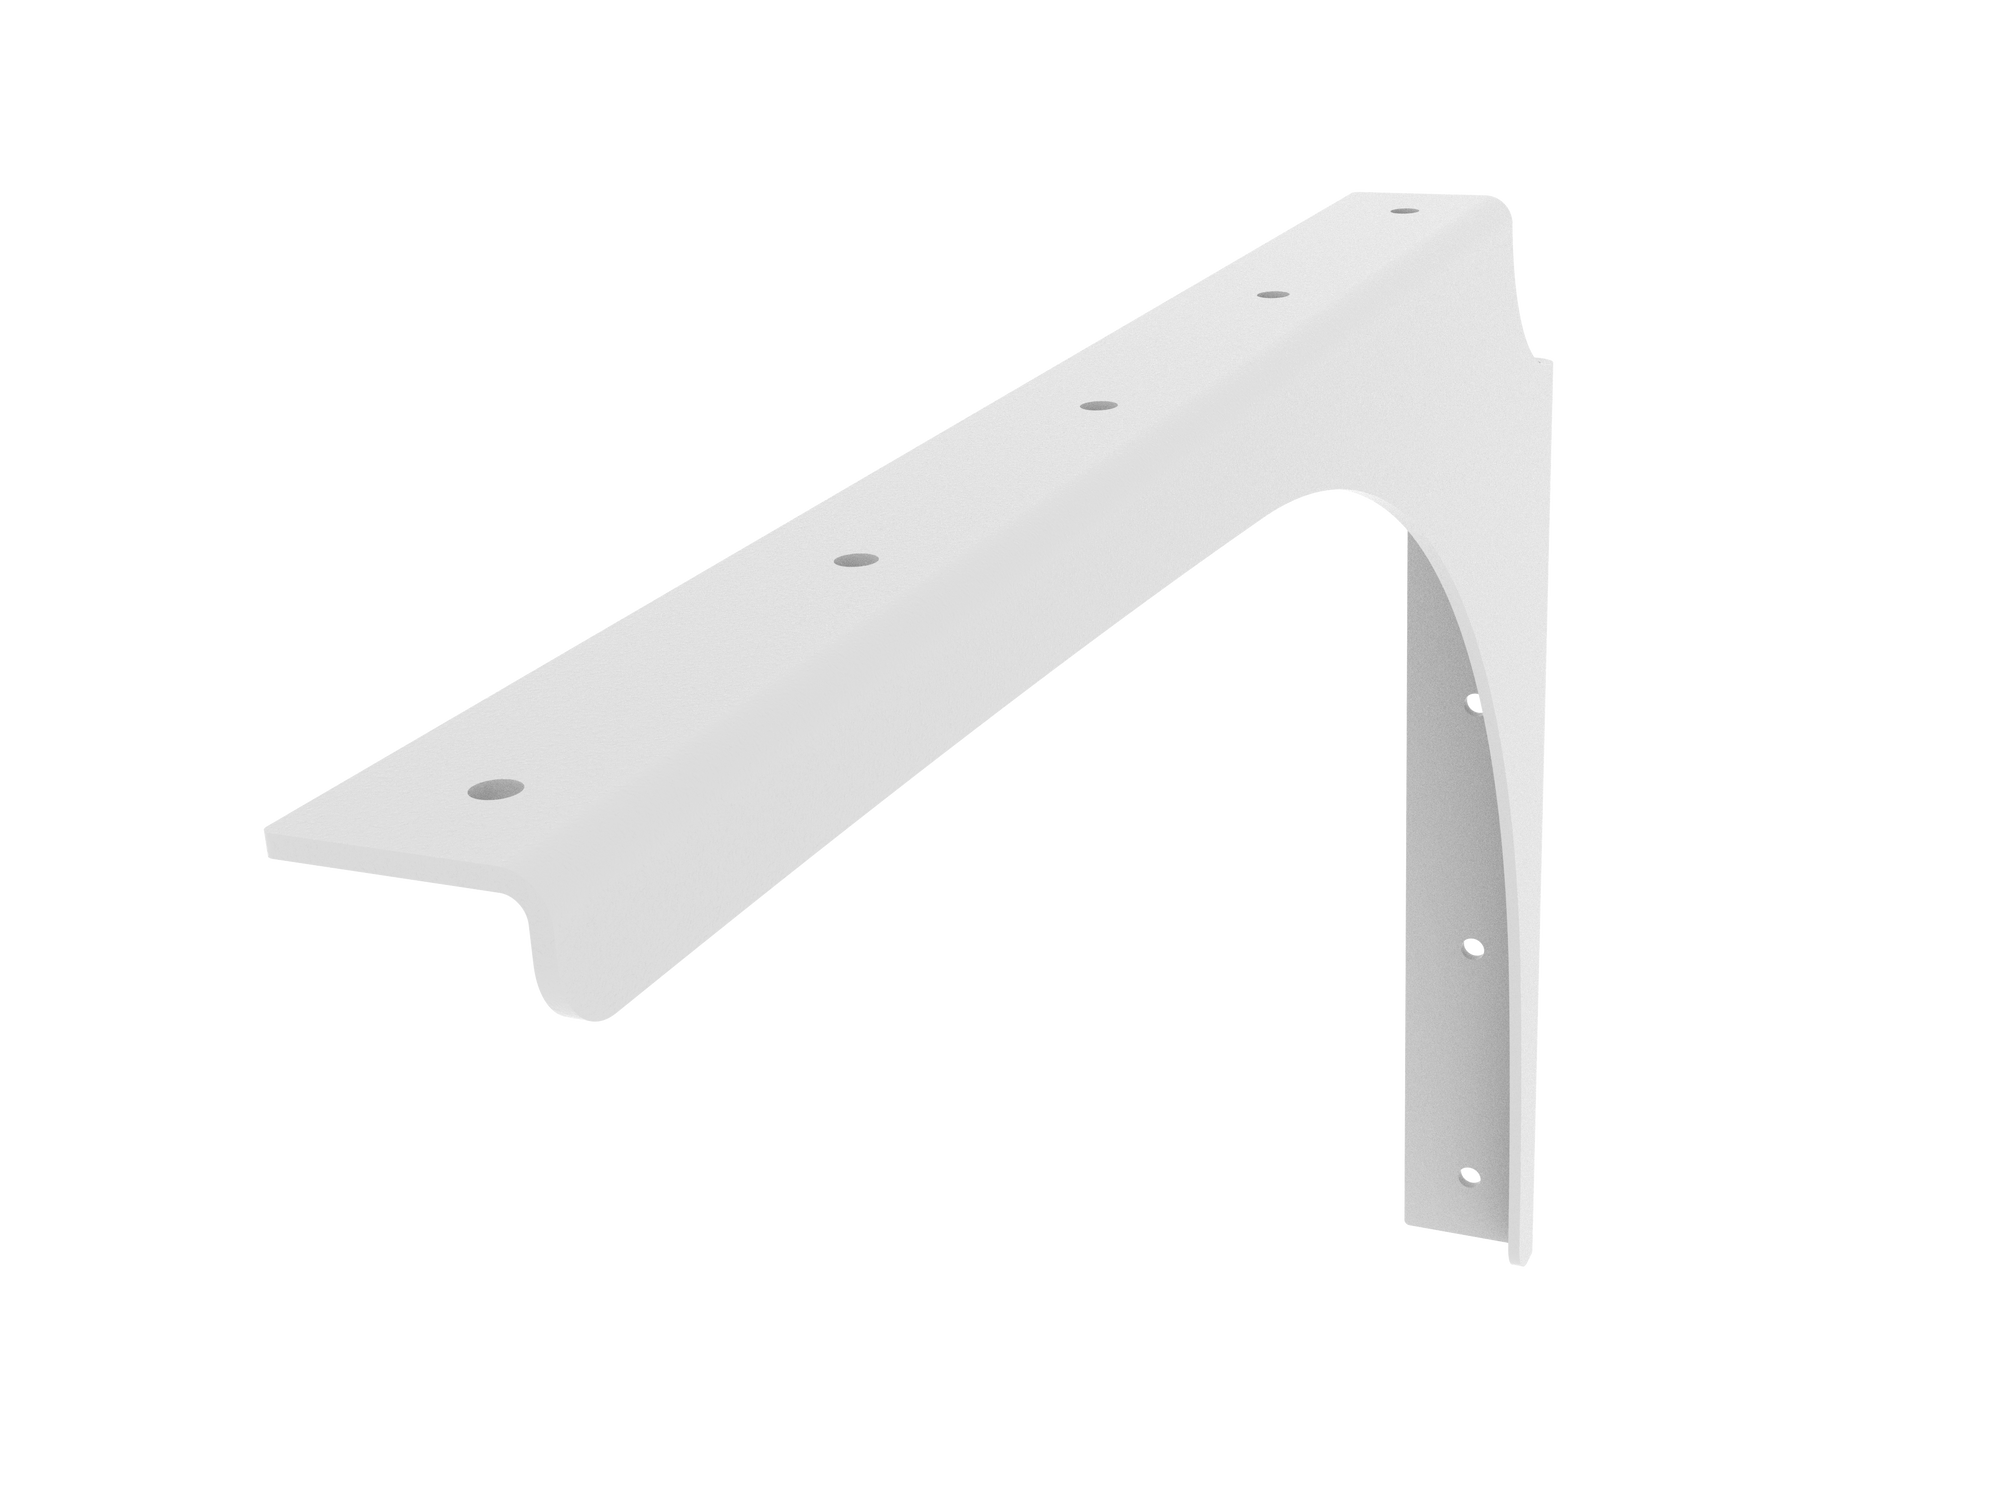 Universal Commercial Support Bracket - 18" x 12" Right Handed with White Powder Coat Finish. Supports floating ADA-compliant vanities, desks, shelving, countertops, and more.